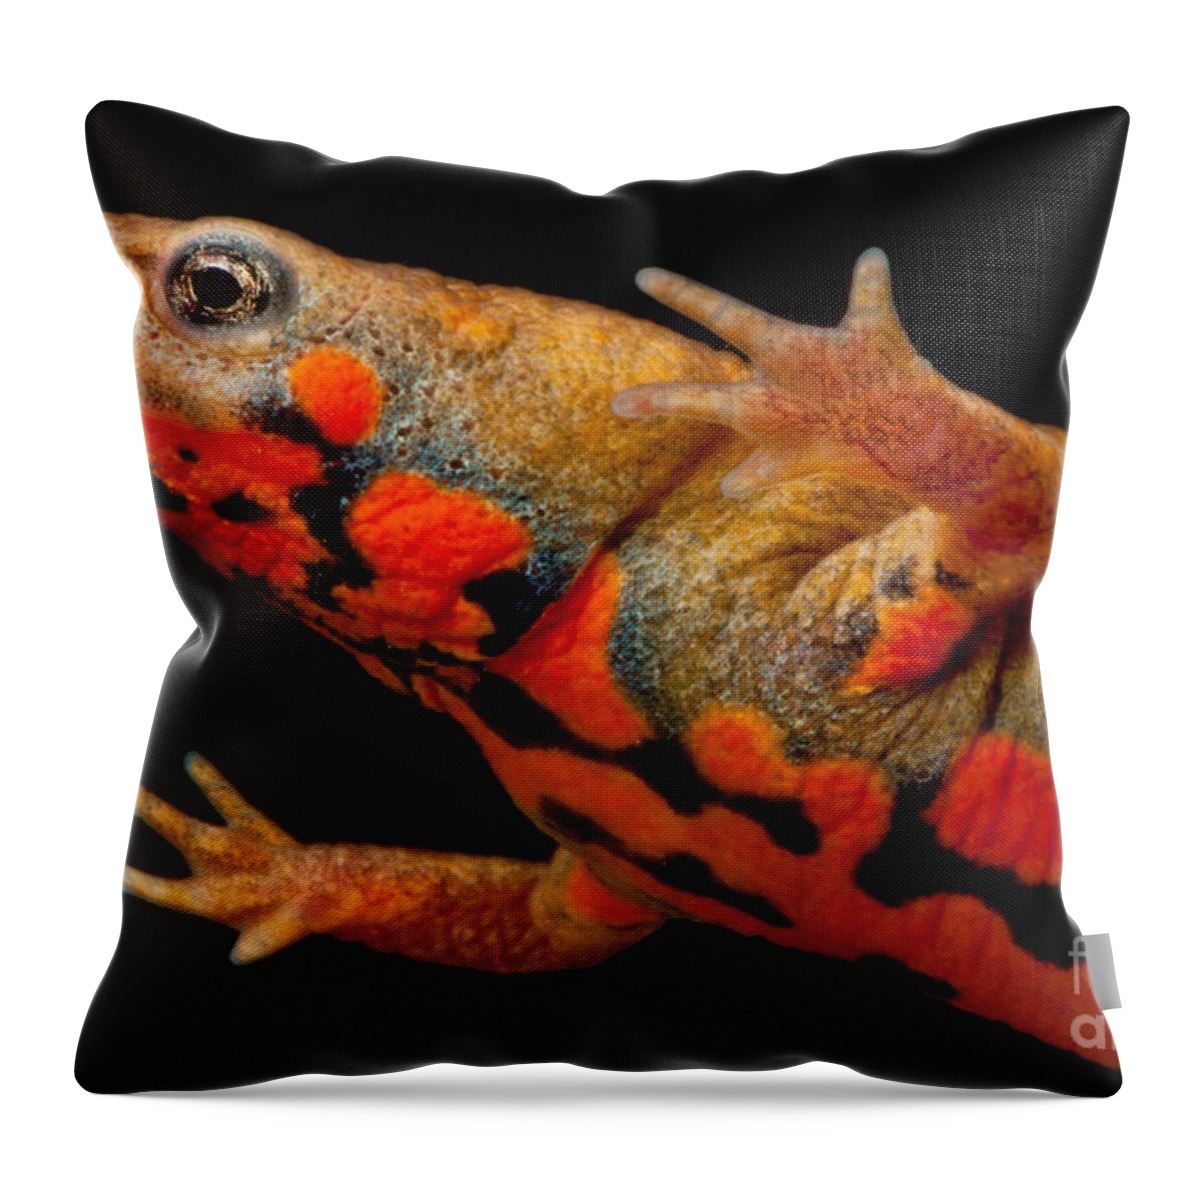 Chuxiong Fire Belly Newt Throw Pillow featuring the photograph Chuxiong Fire Belly Newt by Dant Fenolio